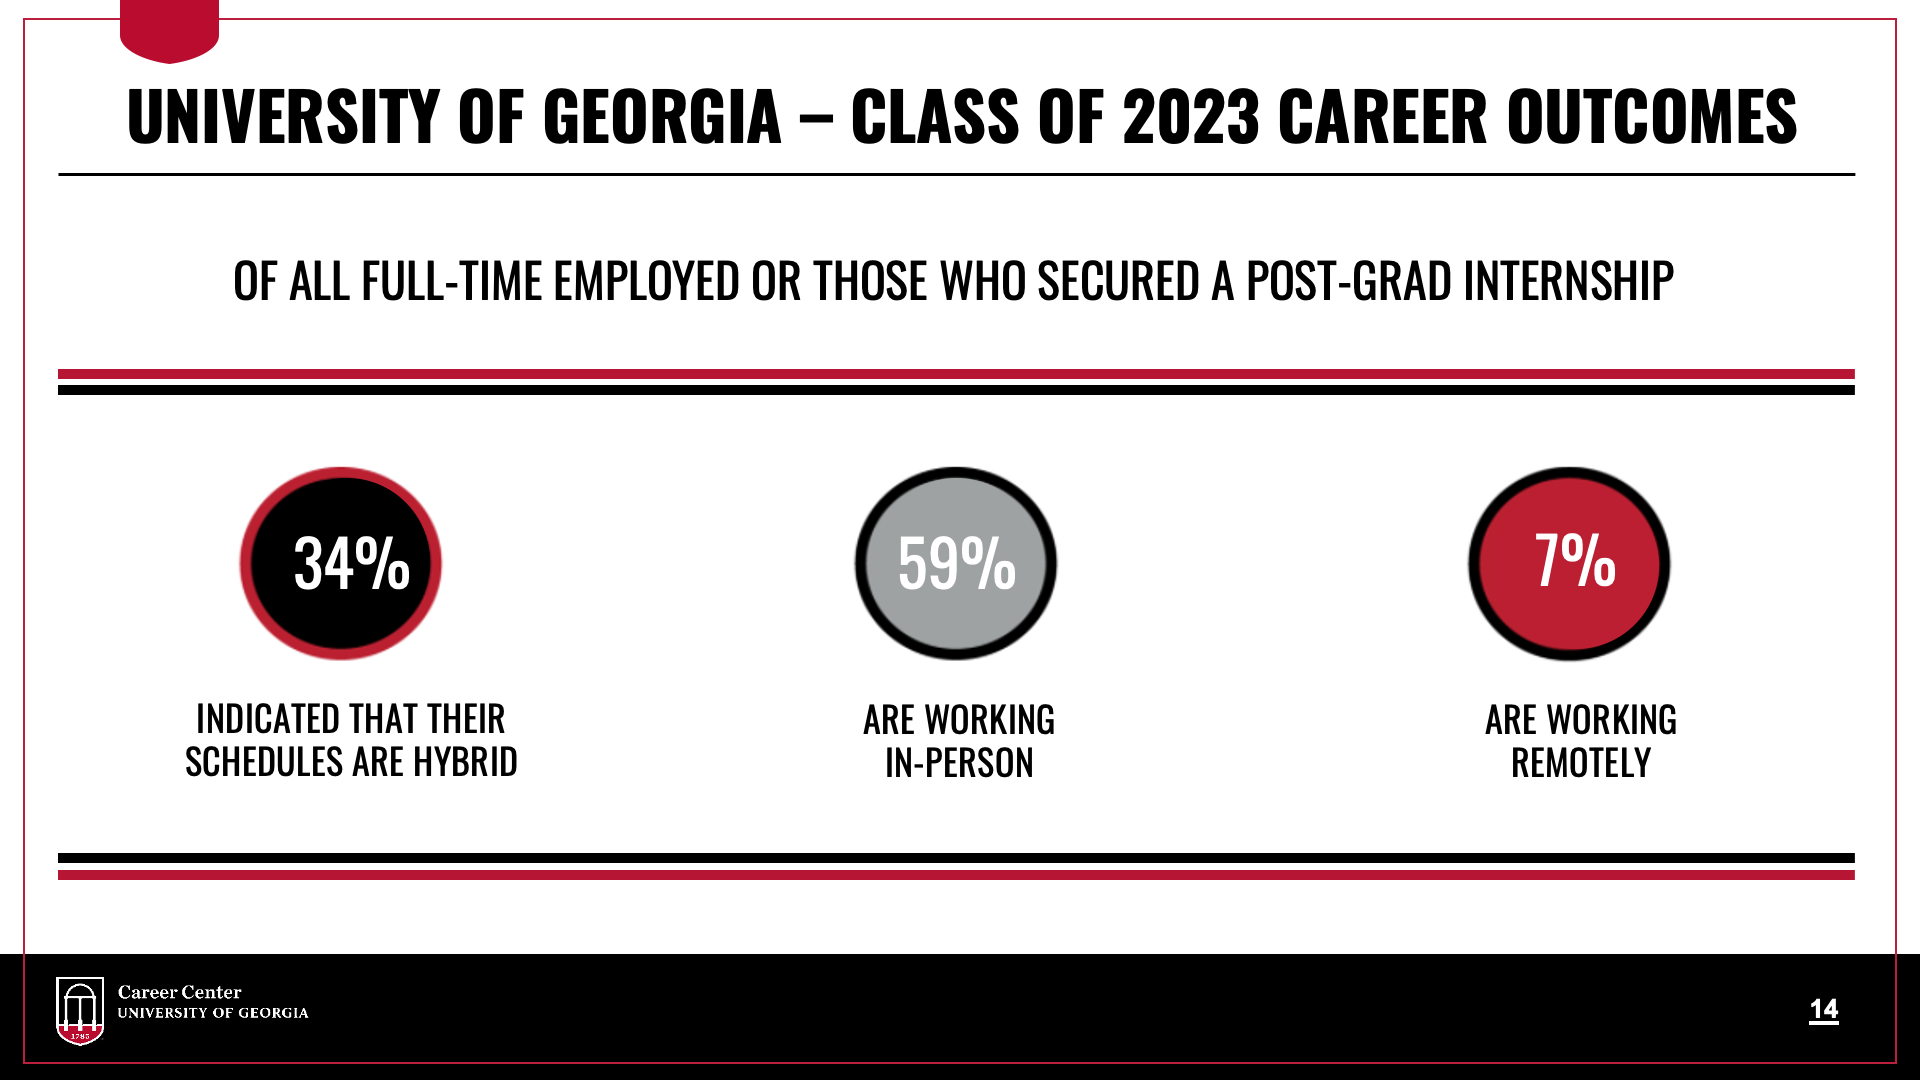 OF ALL FULL-TIME EMPLOYED UGA CLASS OF 2023 GRADUATES, OR THOSE WHO SECURED A POST-GRAD INTERNSHIP OR FELLOWSHIP, 34 PERCENT INDICATED THAT THEIR SCHEDULES ARE HYBRID, 59 PERCENT ARE WORKING IN-PERSON, AND 7 PERCENT ARE WORKING REMOTELY